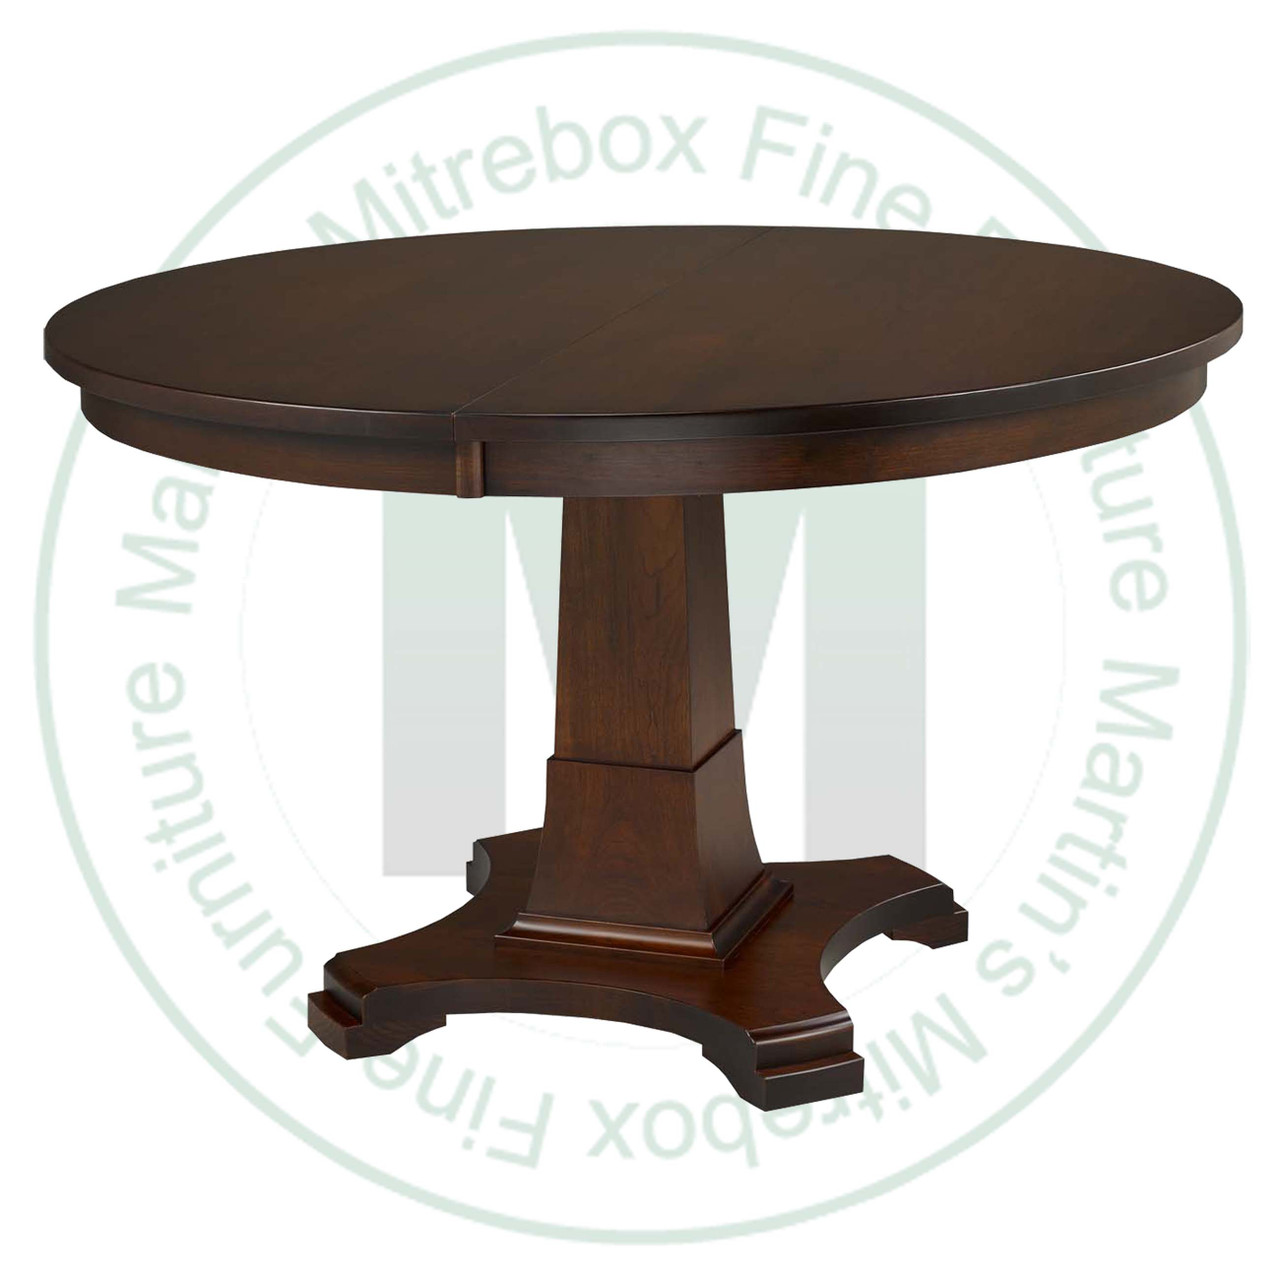 Maple Abbey Single Pedestal Table 36''D x 42''W x 30''H  Round Solid Table. Table Has 1.25'' Thick Top